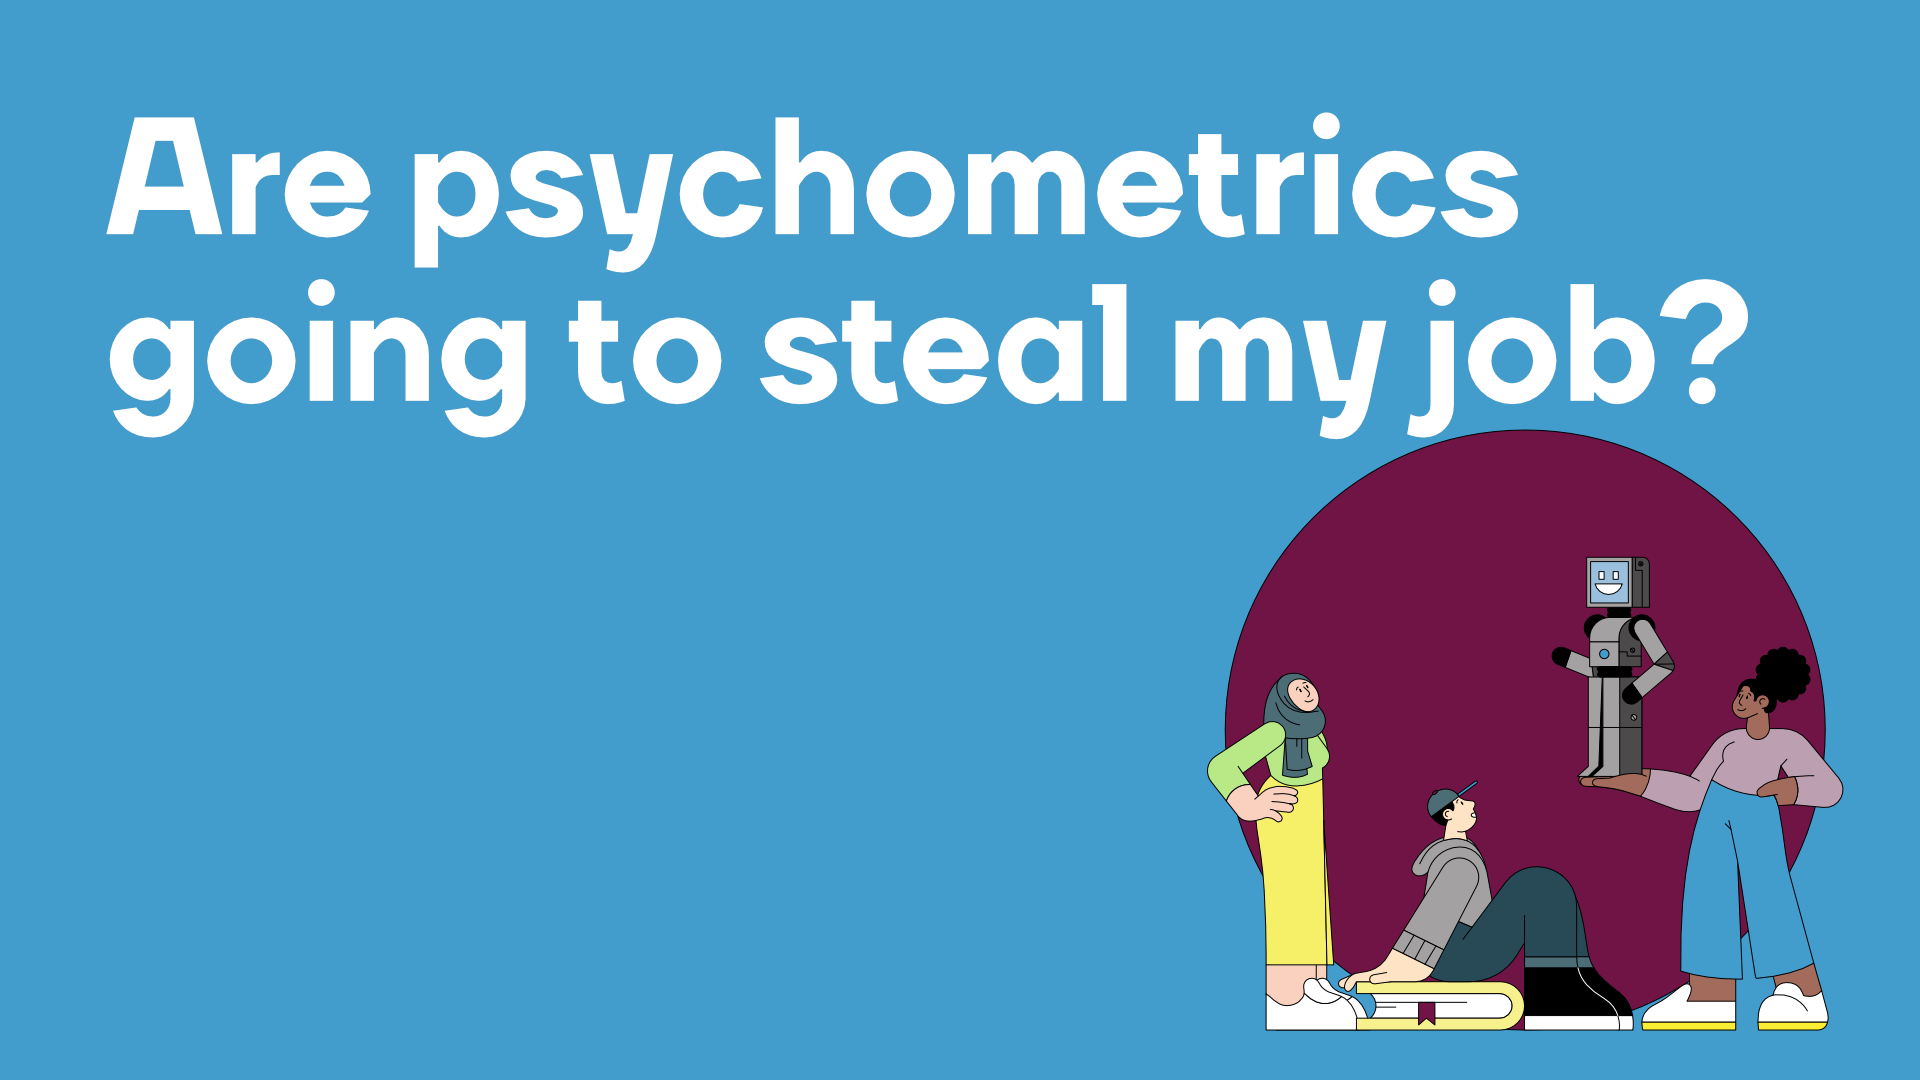 Are psychometrics going to steal my job